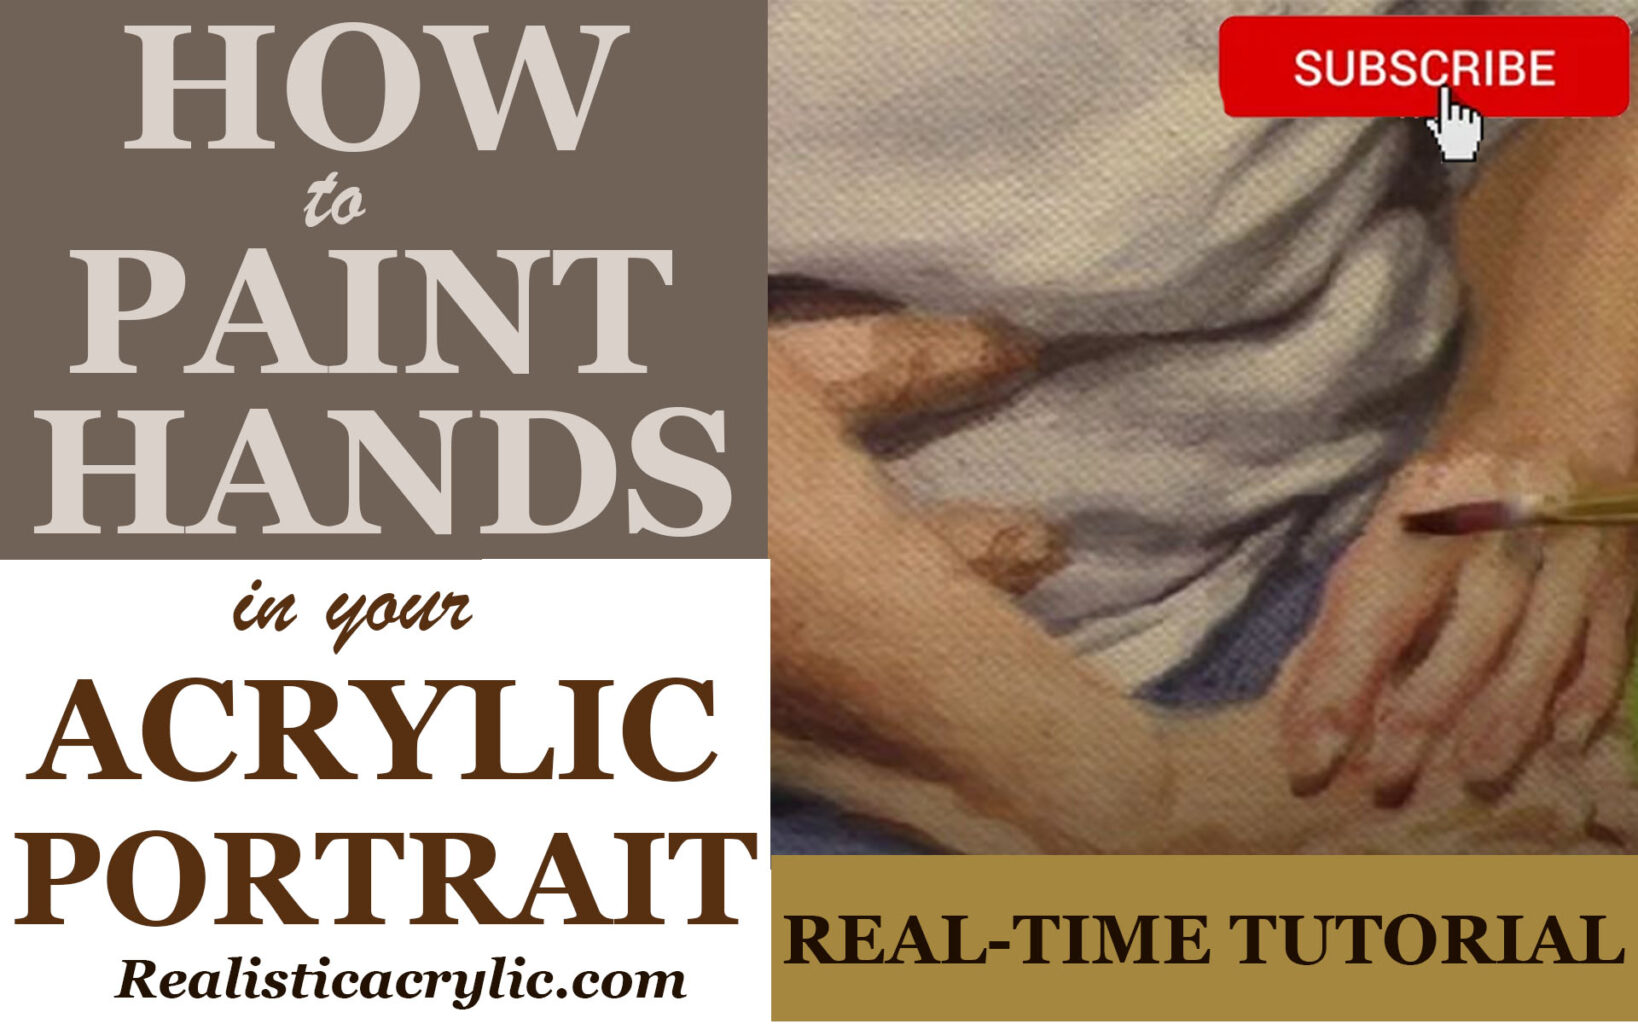 How to Paint Hands in Your Acrylic Portrait